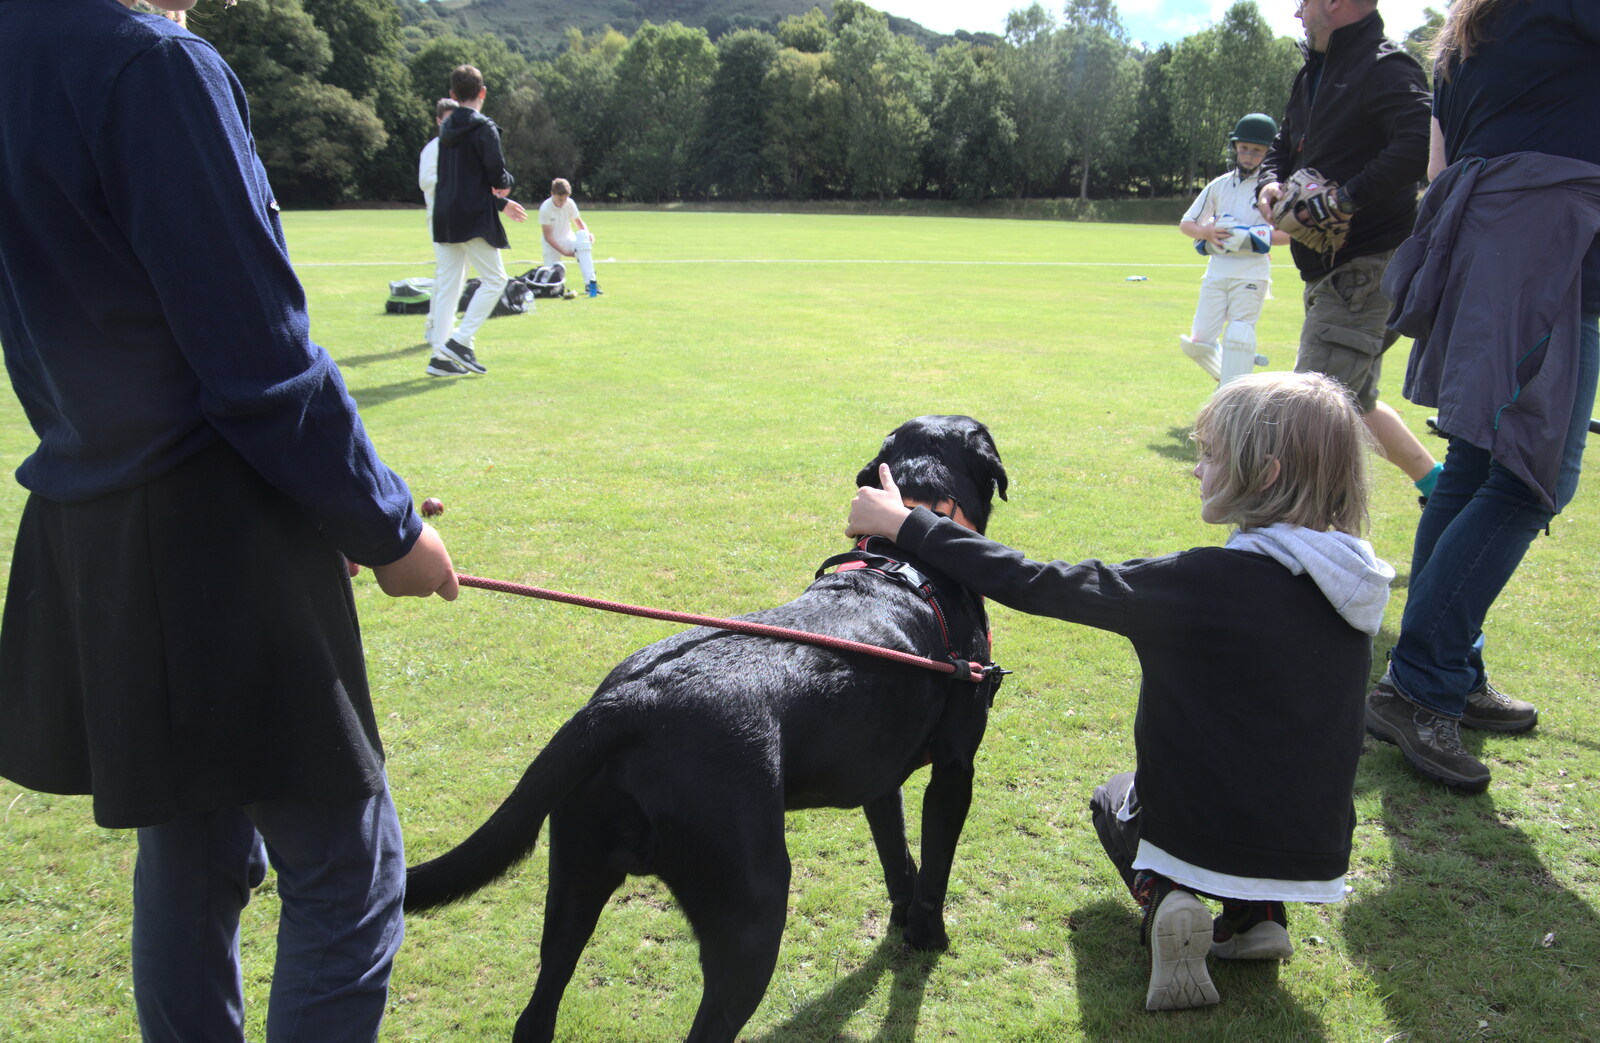 Harry says hello to Doug the Dog from A Game of Cricket, and a Walk Around Chagford, Devon - 23rd August 2020